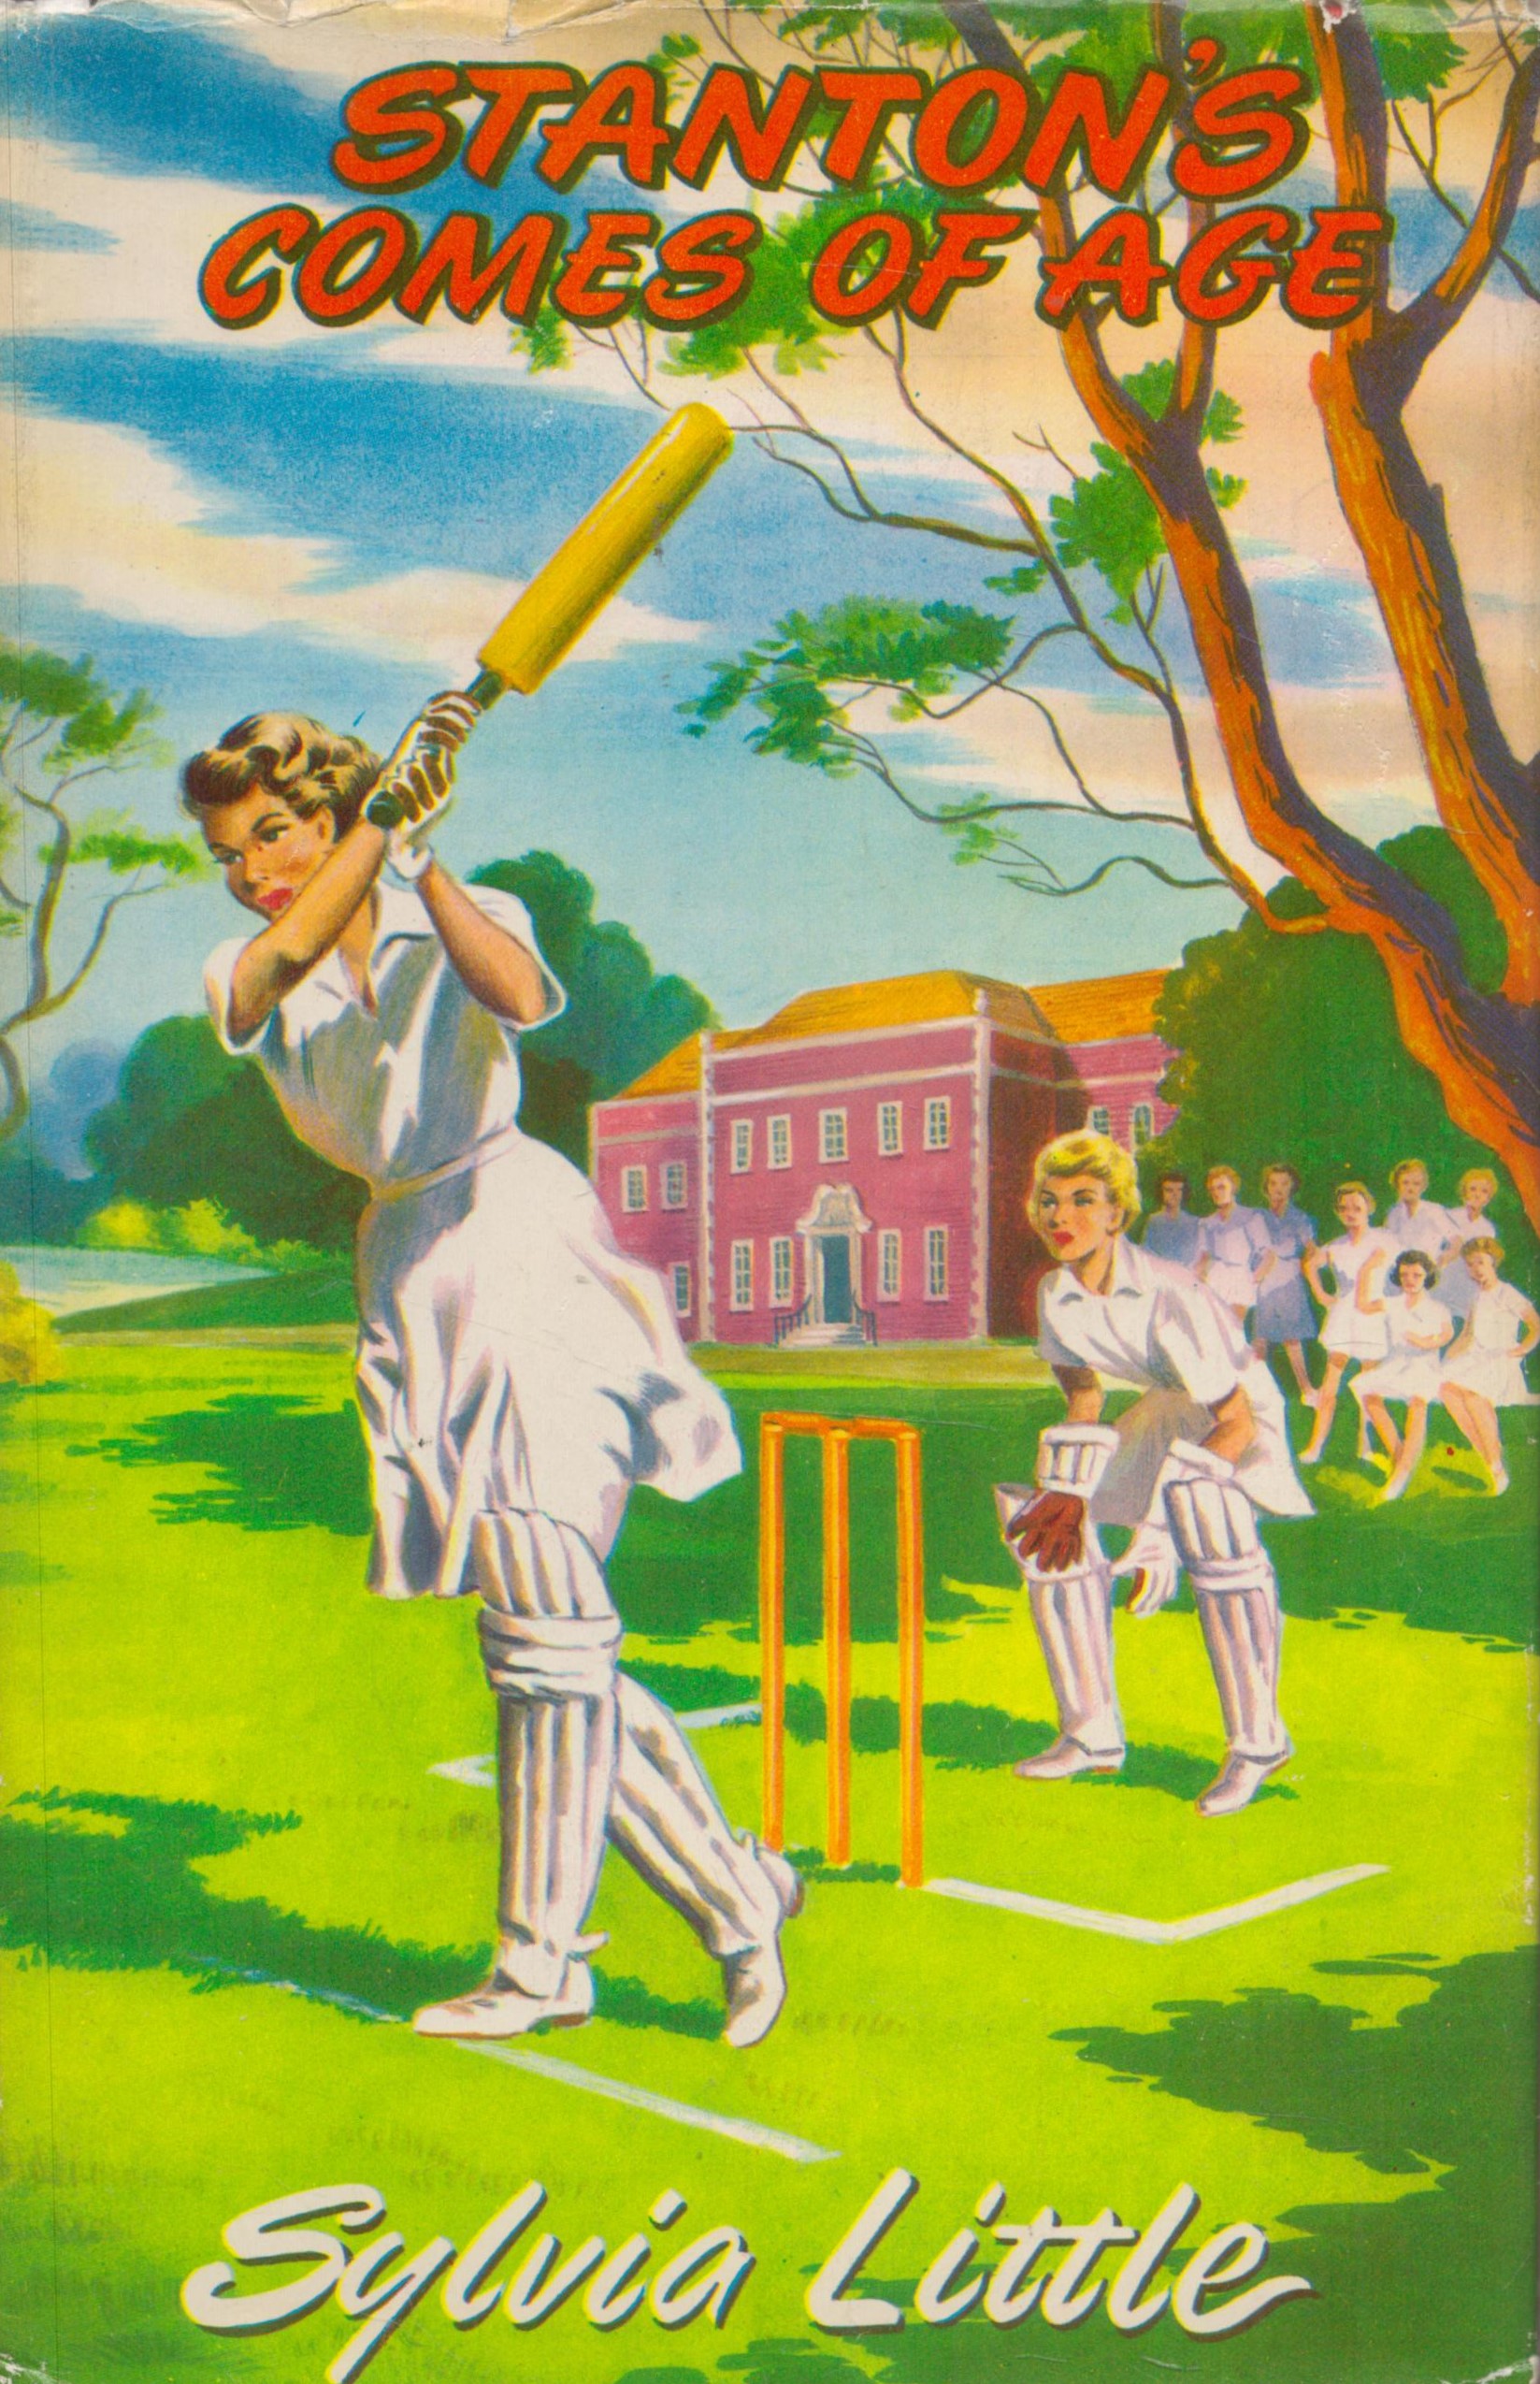 Stanton's Comes of Age by Sylvia Little date and edition unknown Hardback Book with 186 pages